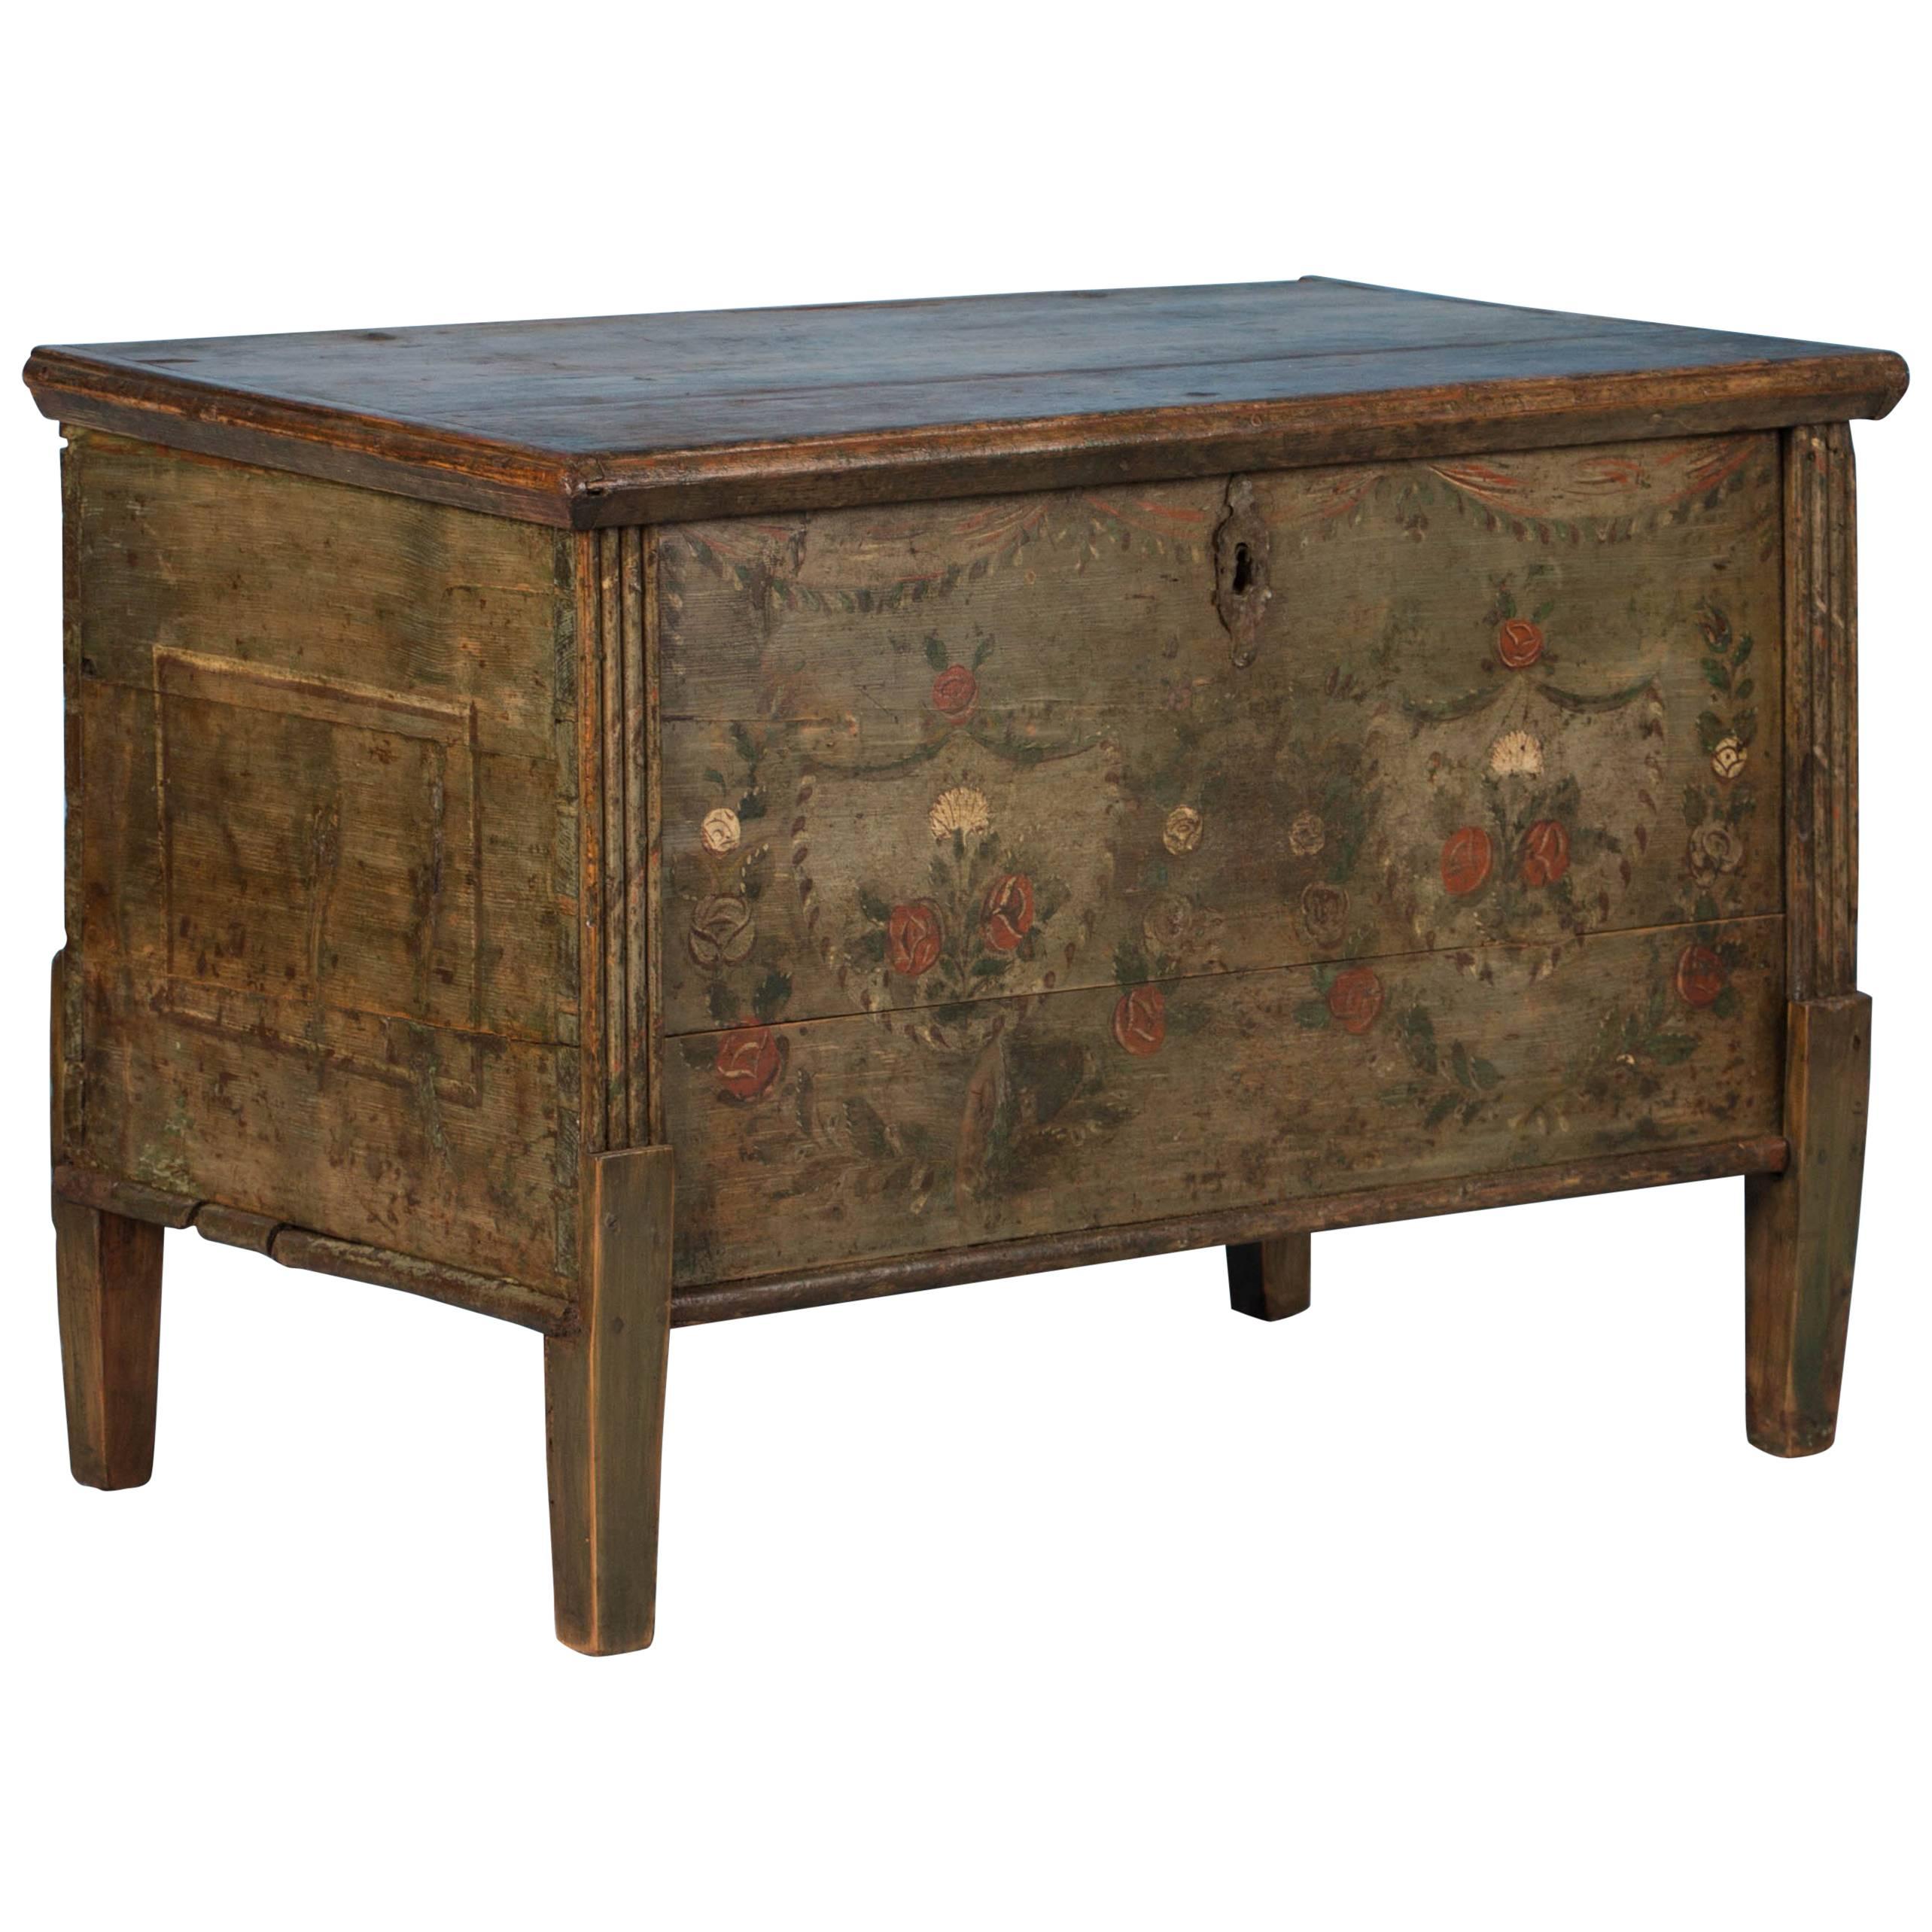 Flat Top Green Trunk with Original Painted Floral Details, circa 1840-1860